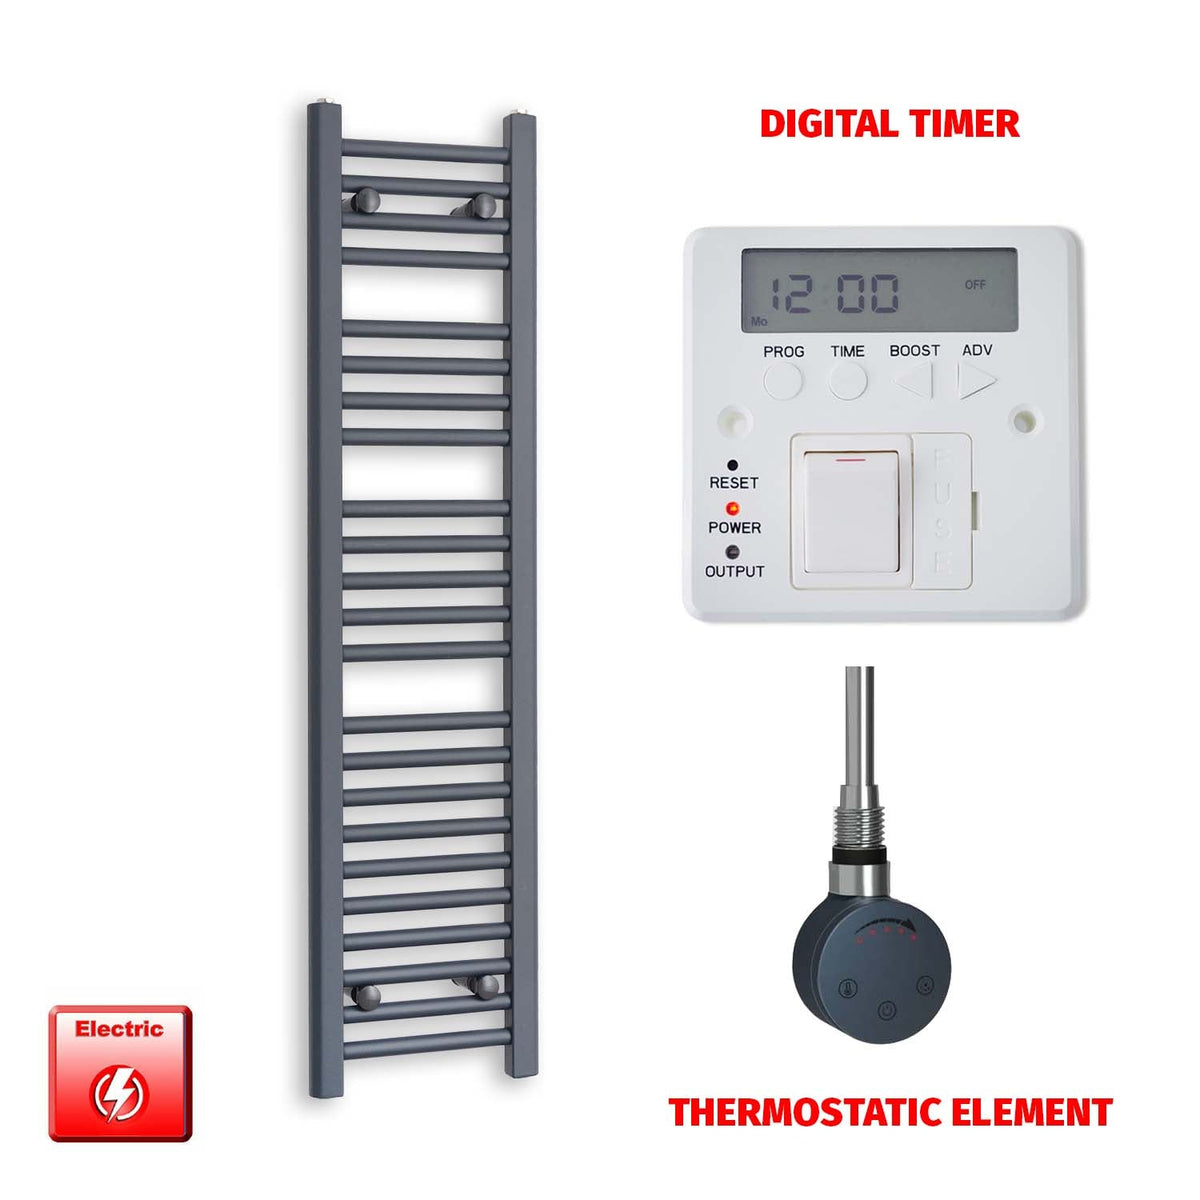 1200mm High 300mm Wide Flat Anthracite Pre-Filled Electric Heated Towel Rail Radiator HTR SMR Thermostatic element Digital timer